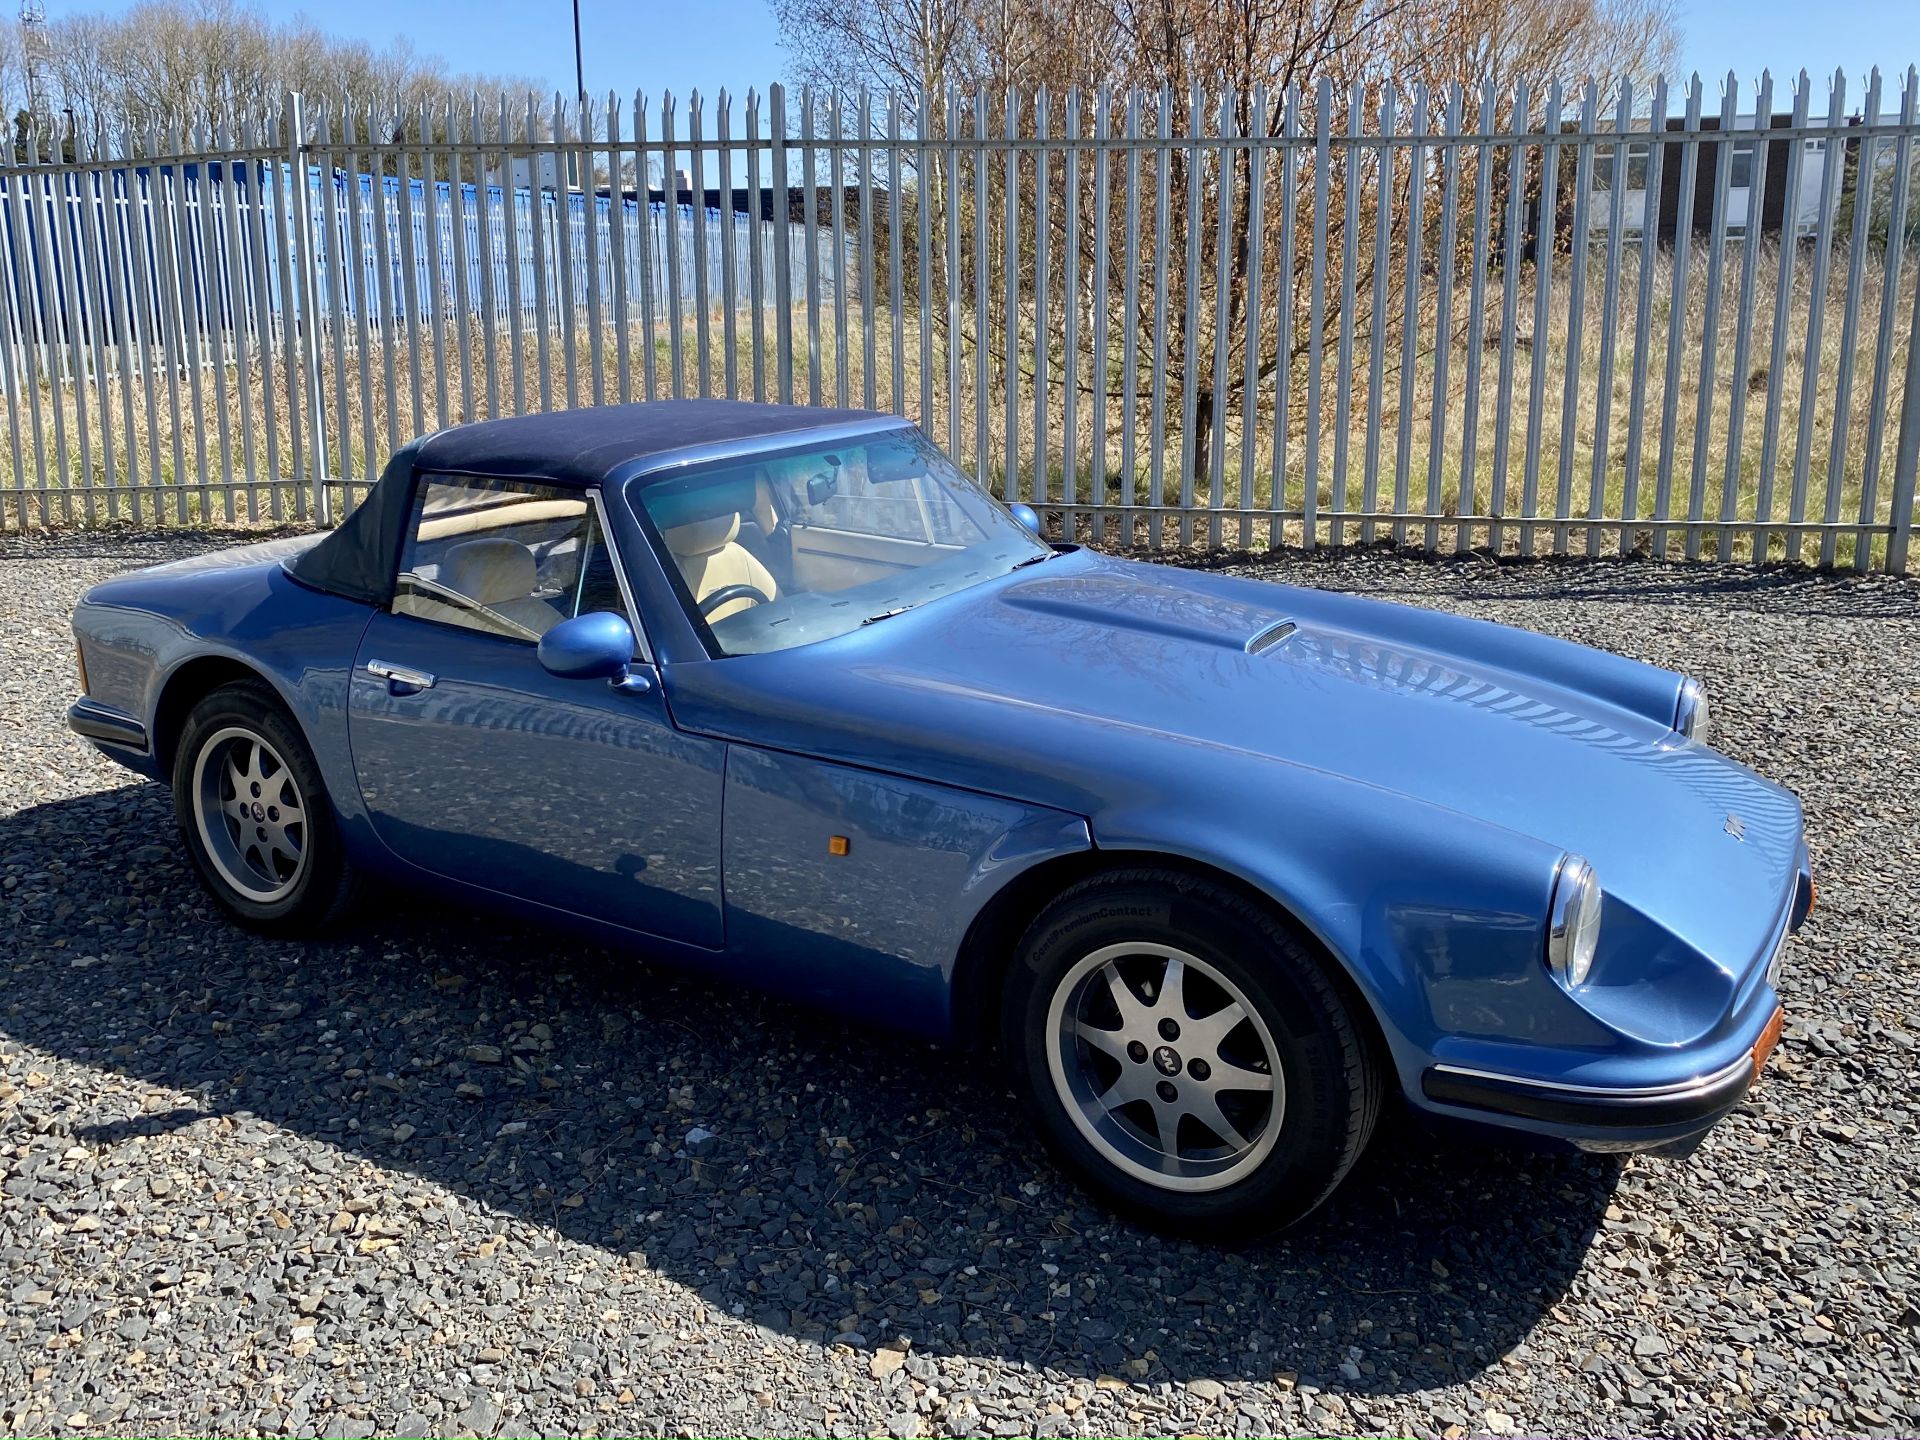 TVR S2 - Image 48 of 60